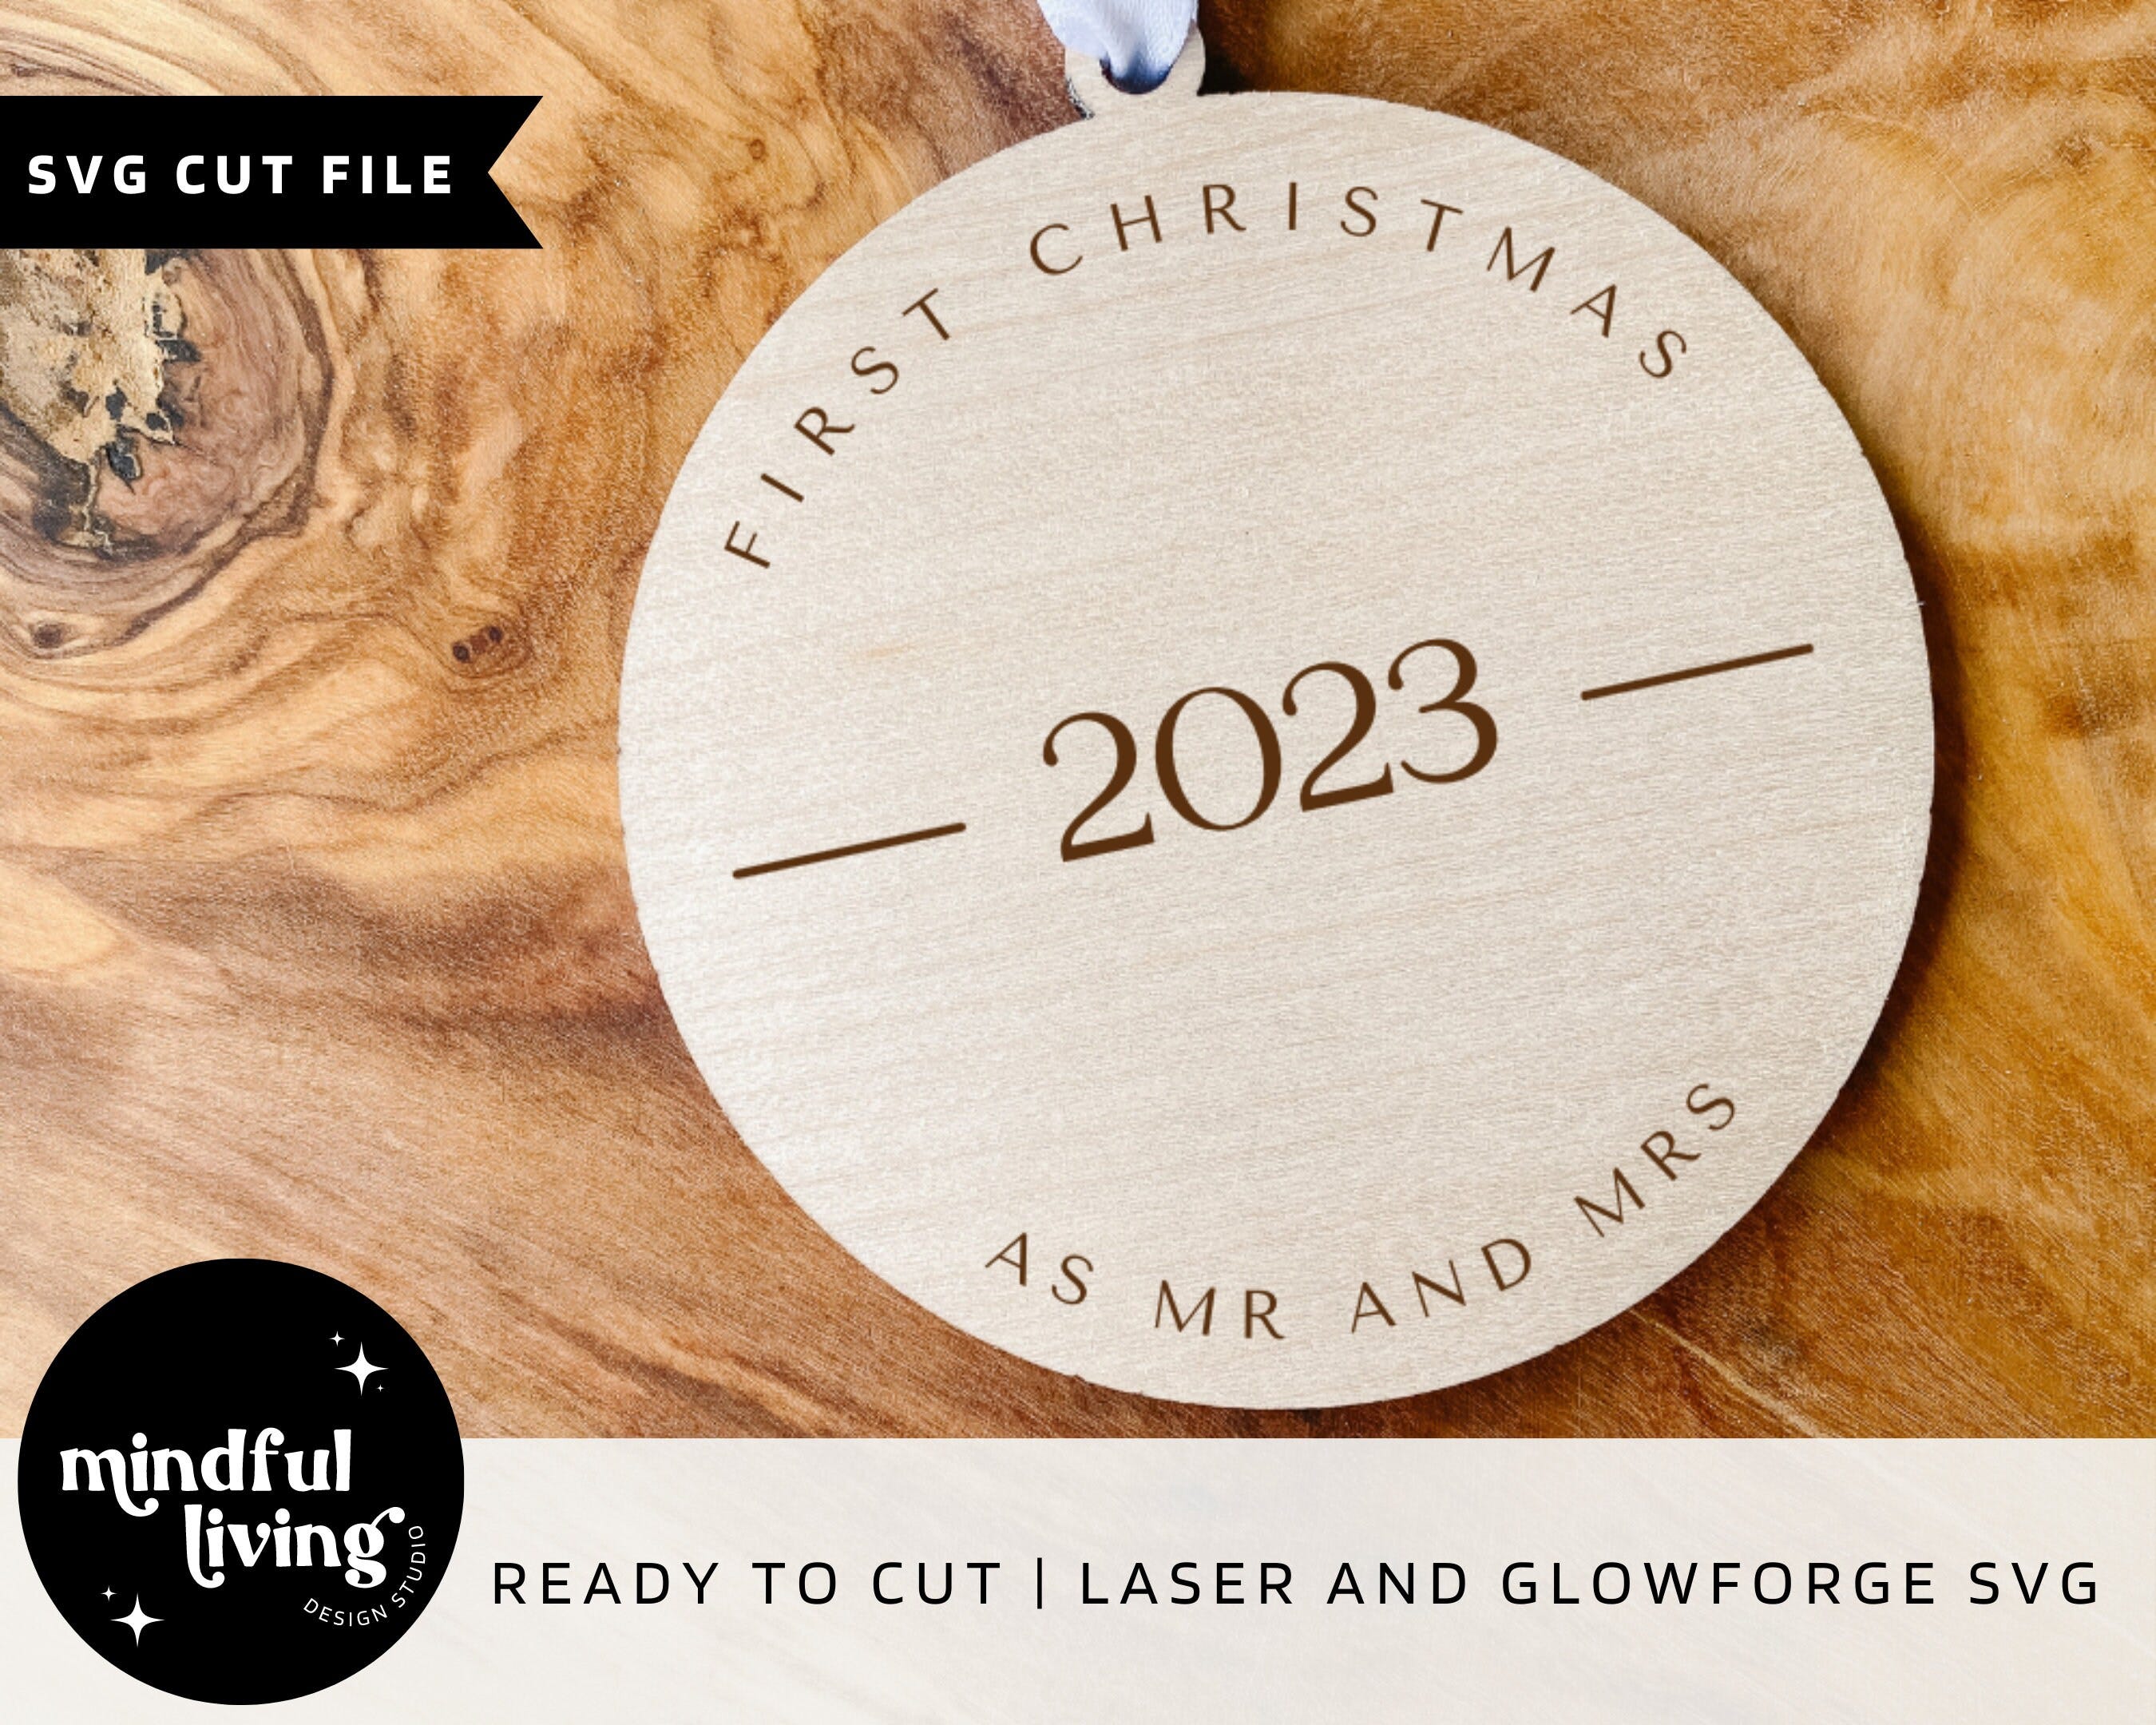 First Christmas Married SVG, Christmas Ornament Cut File, Ornament SVG, Ornament Cut File, 2023 Ornament Laser File, 2023 Ornament